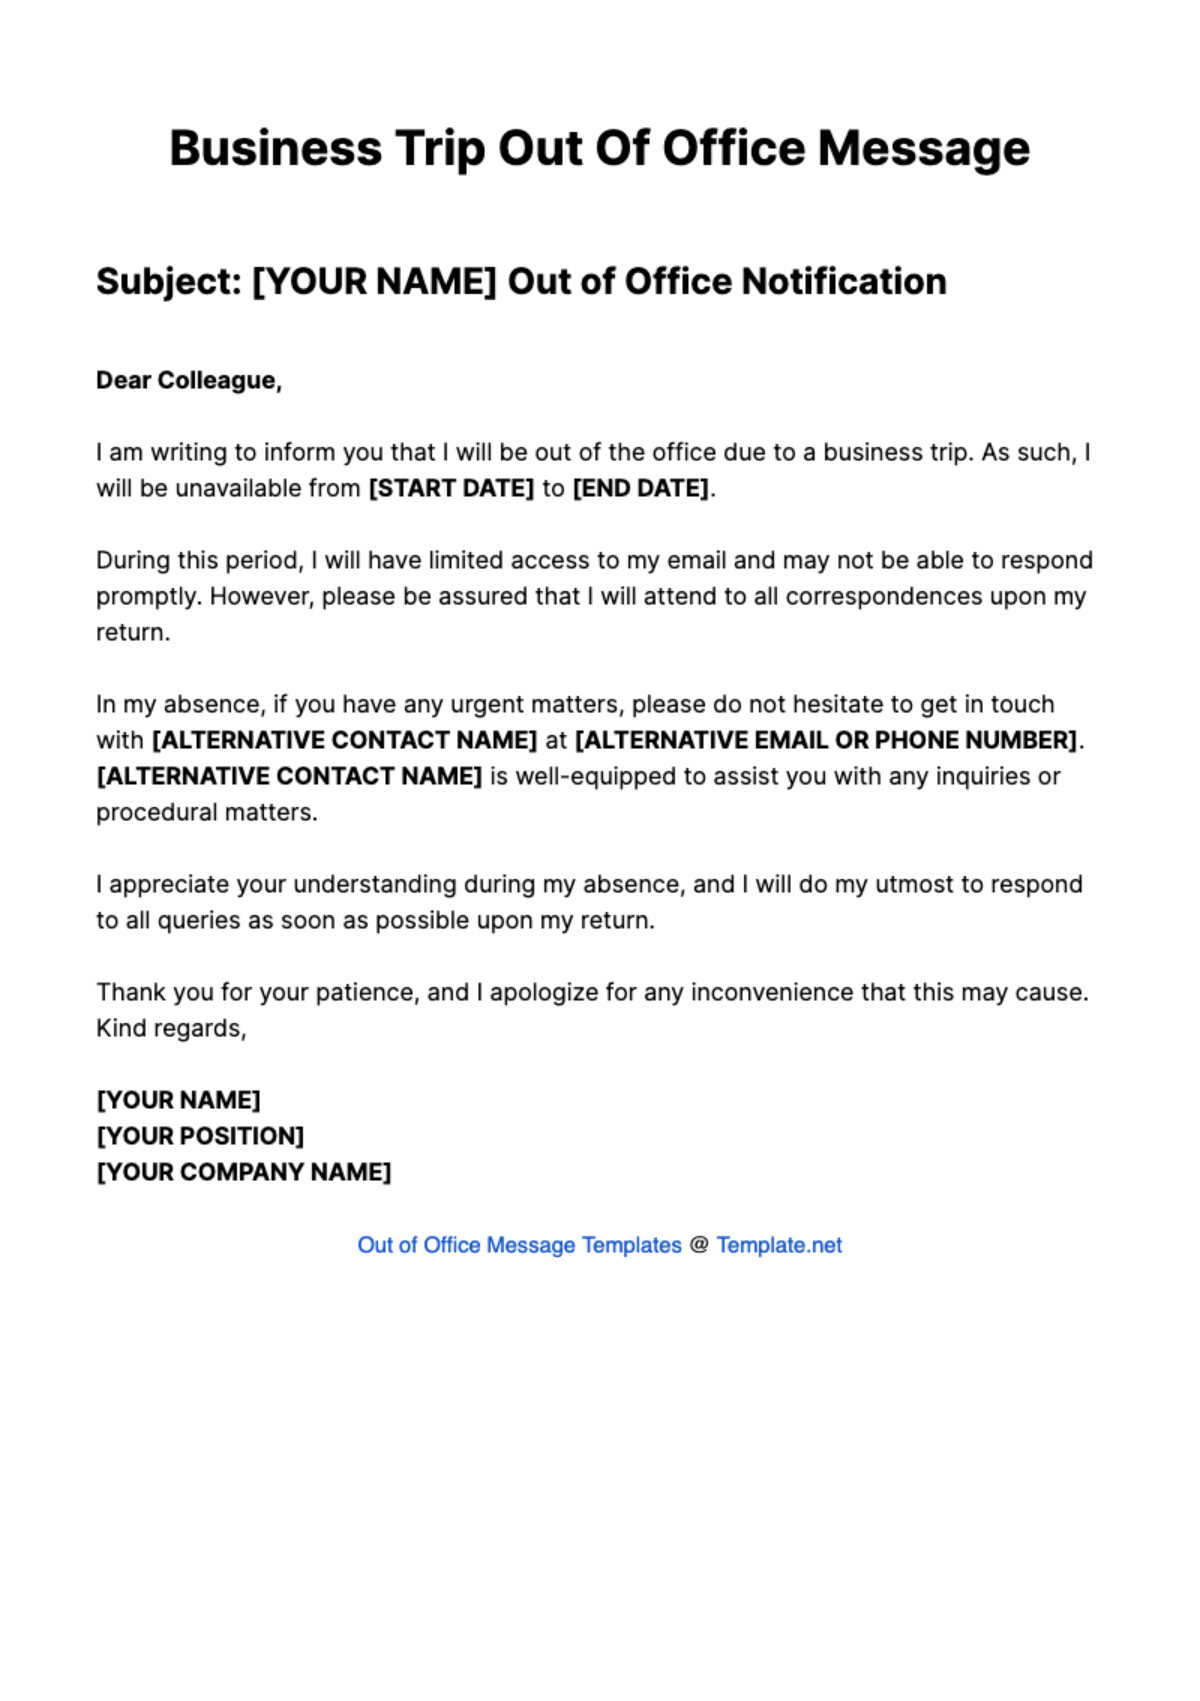 Business Trip Out Of Office Message Template